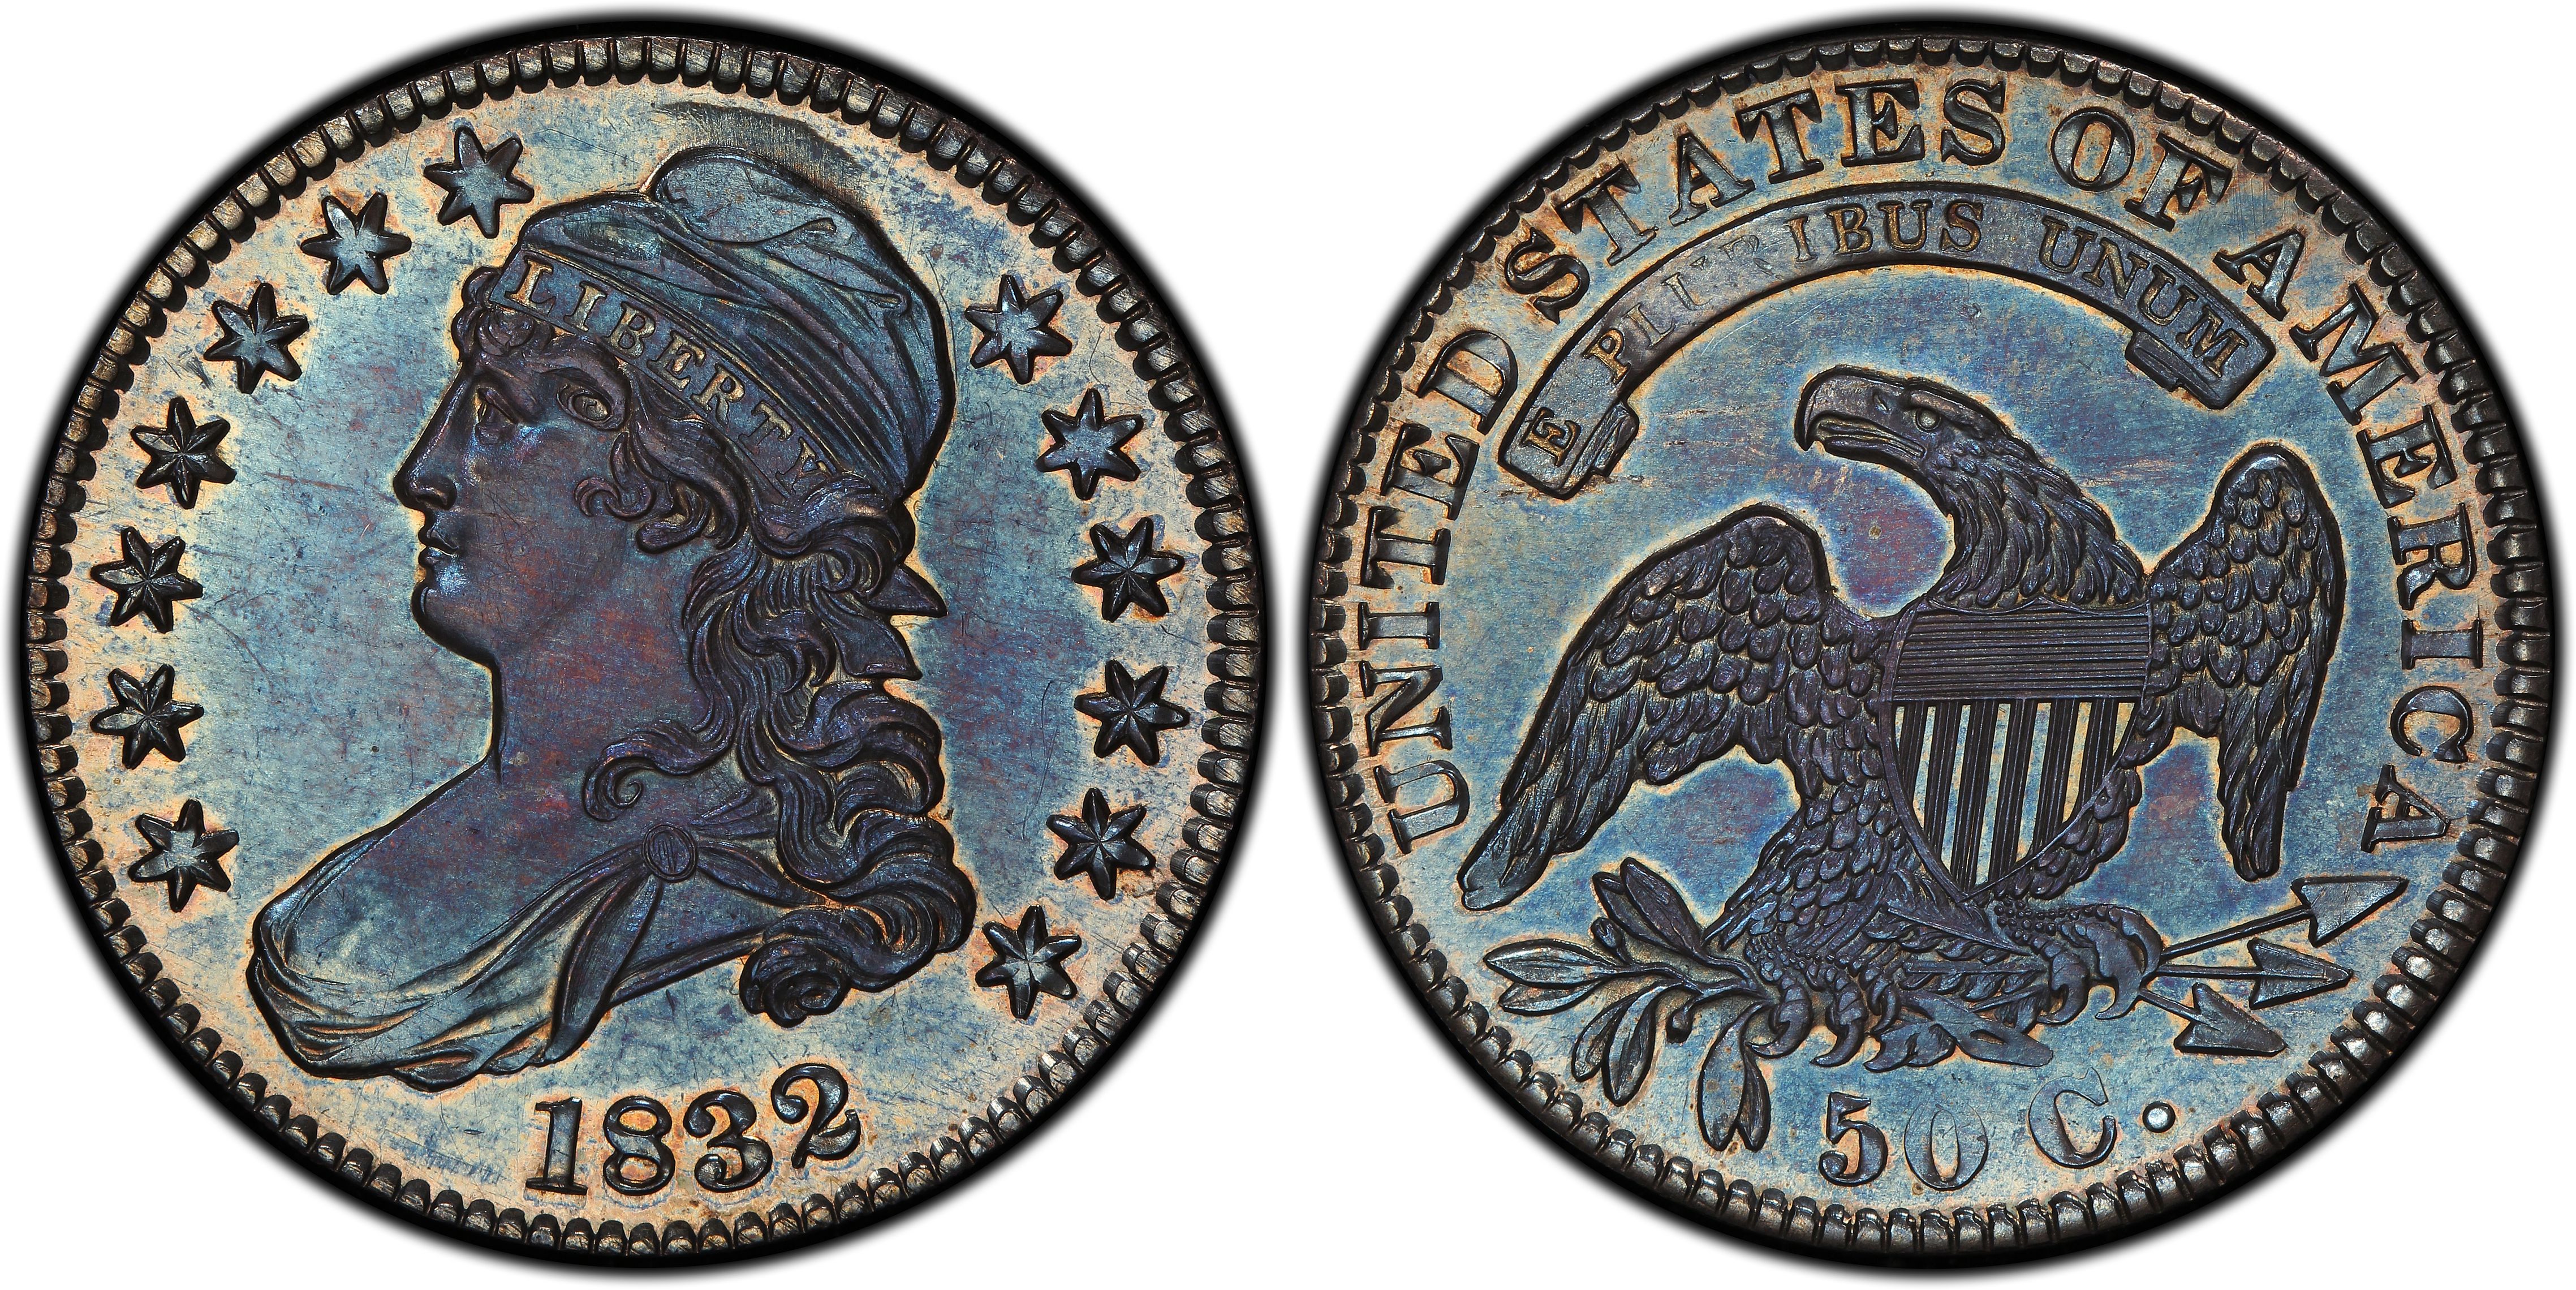 1832 50C (Proof) Capped Bust Half Dollar - PCGS CoinFacts